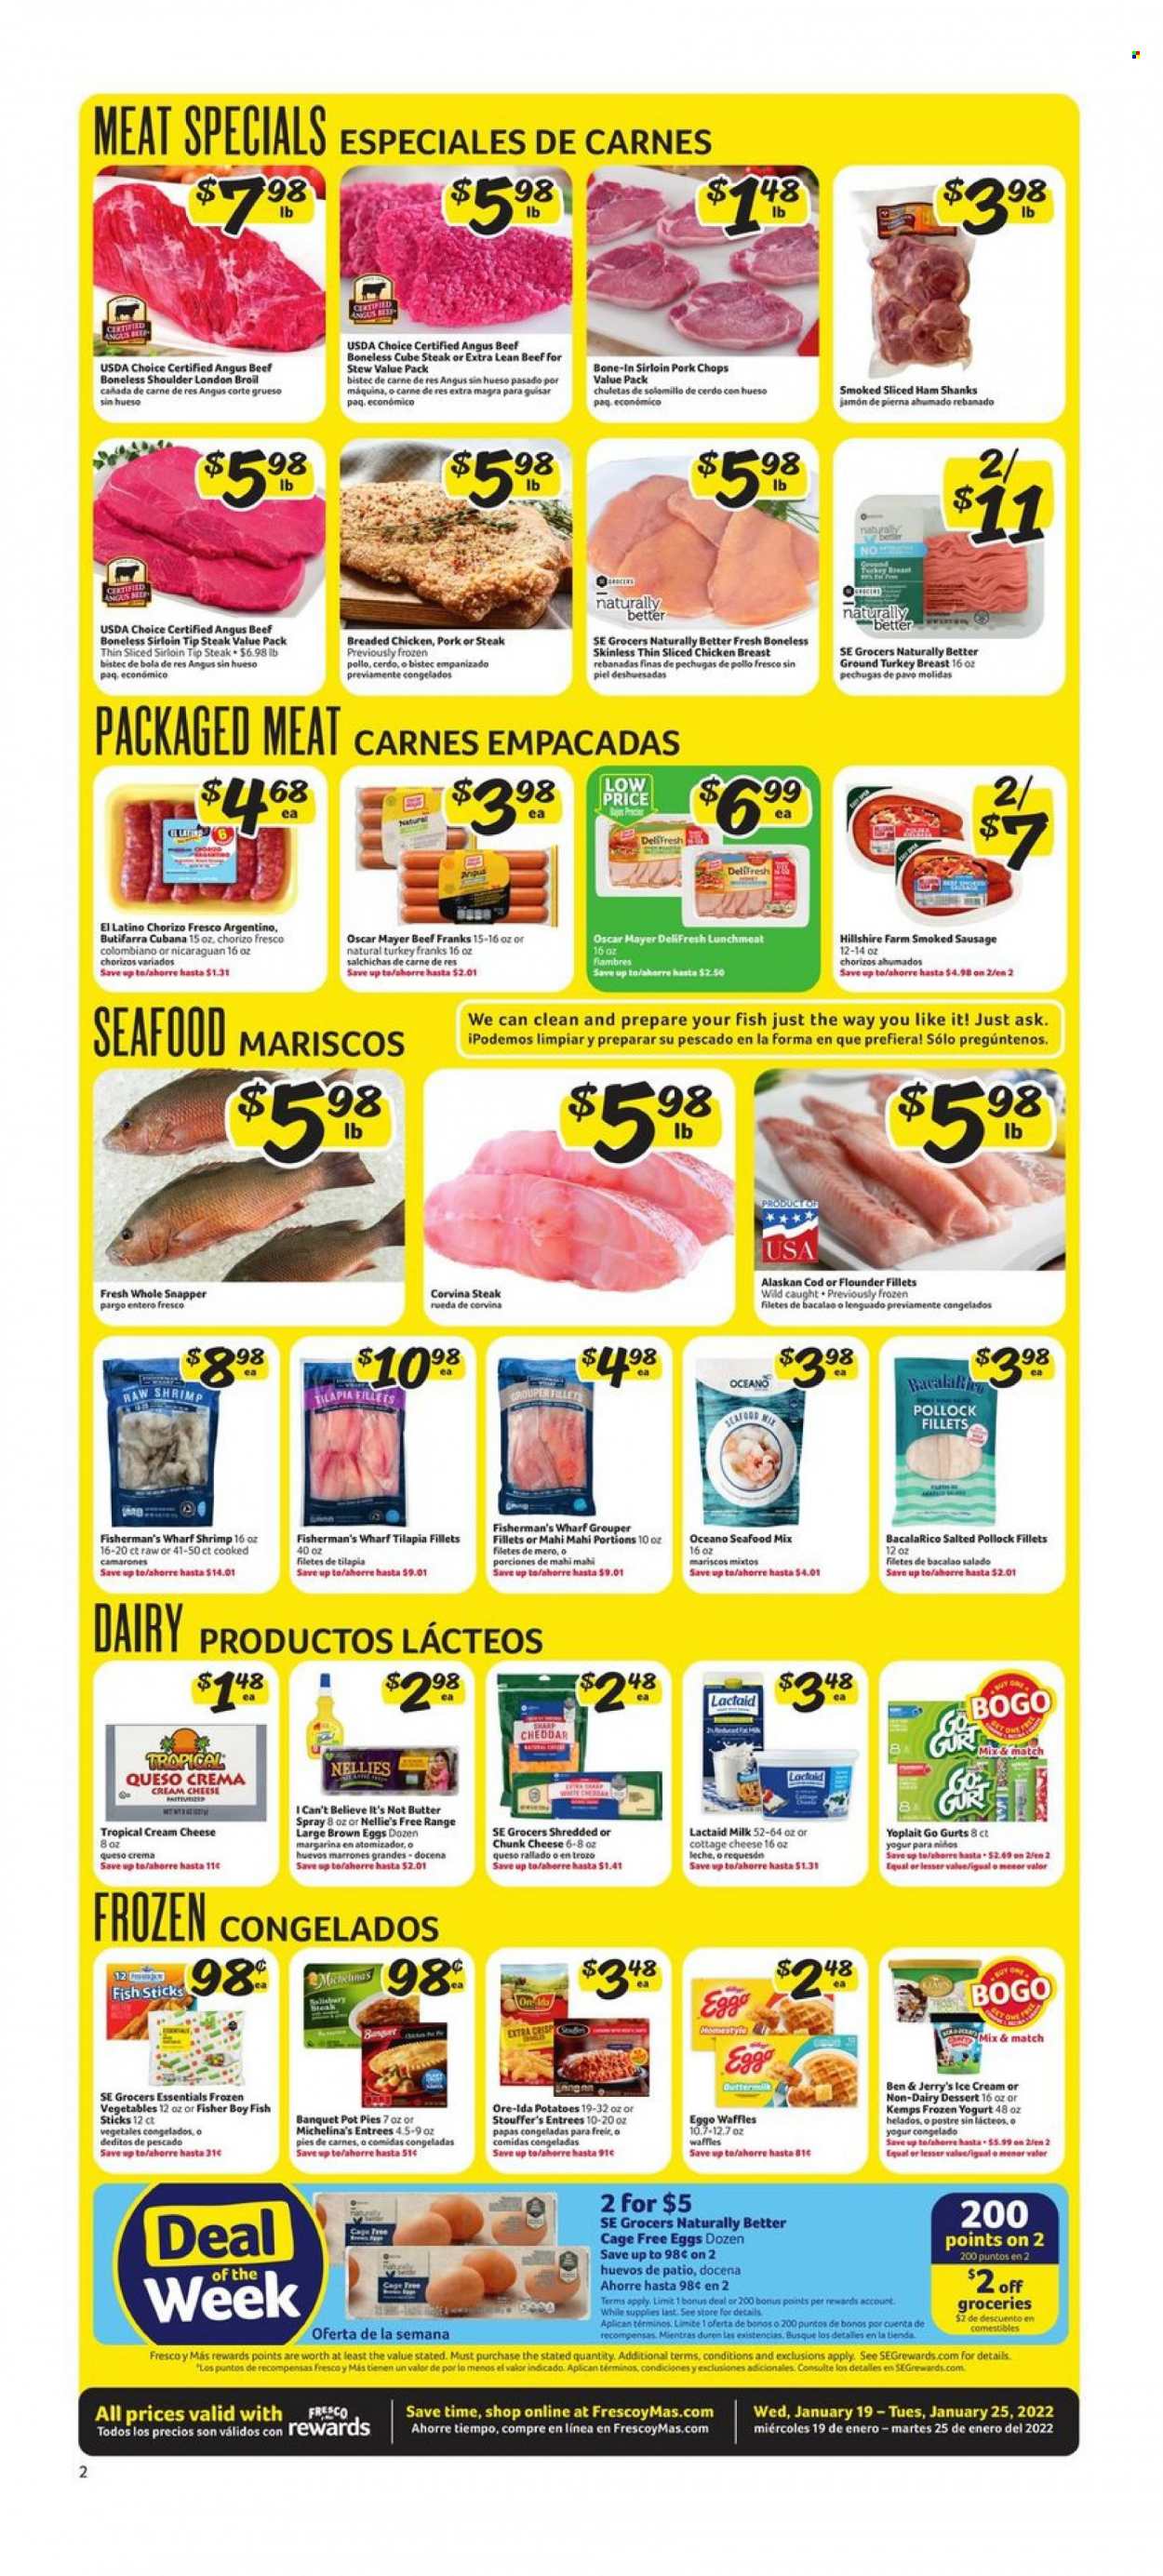 thumbnail - Fresco y Más Flyer - 01/19/2022 - 01/25/2022 - Sales products - pot pie, waffles, potatoes, cod, flounder, grouper, mahi mahi, tilapia, pollock, seafood, fish, shrimps, fish fingers, fish sticks, fried chicken, ham, Hillshire Farm, chorizo, Oscar Mayer, sausage, smoked sausage, lunch meat, cottage cheese, cream cheese, Lactaid, cheddar, cheese, chunk cheese, Kemps, yoghurt, Yoplait, milk, eggs, cage free eggs, butter, I Can't Believe It's Not Butter, ice cream, Ben & Jerry's, frozen vegetables, Stouffer's, Ore-Ida, ground turkey, beef meat, steak, pork chops, pork meat. Page 2.